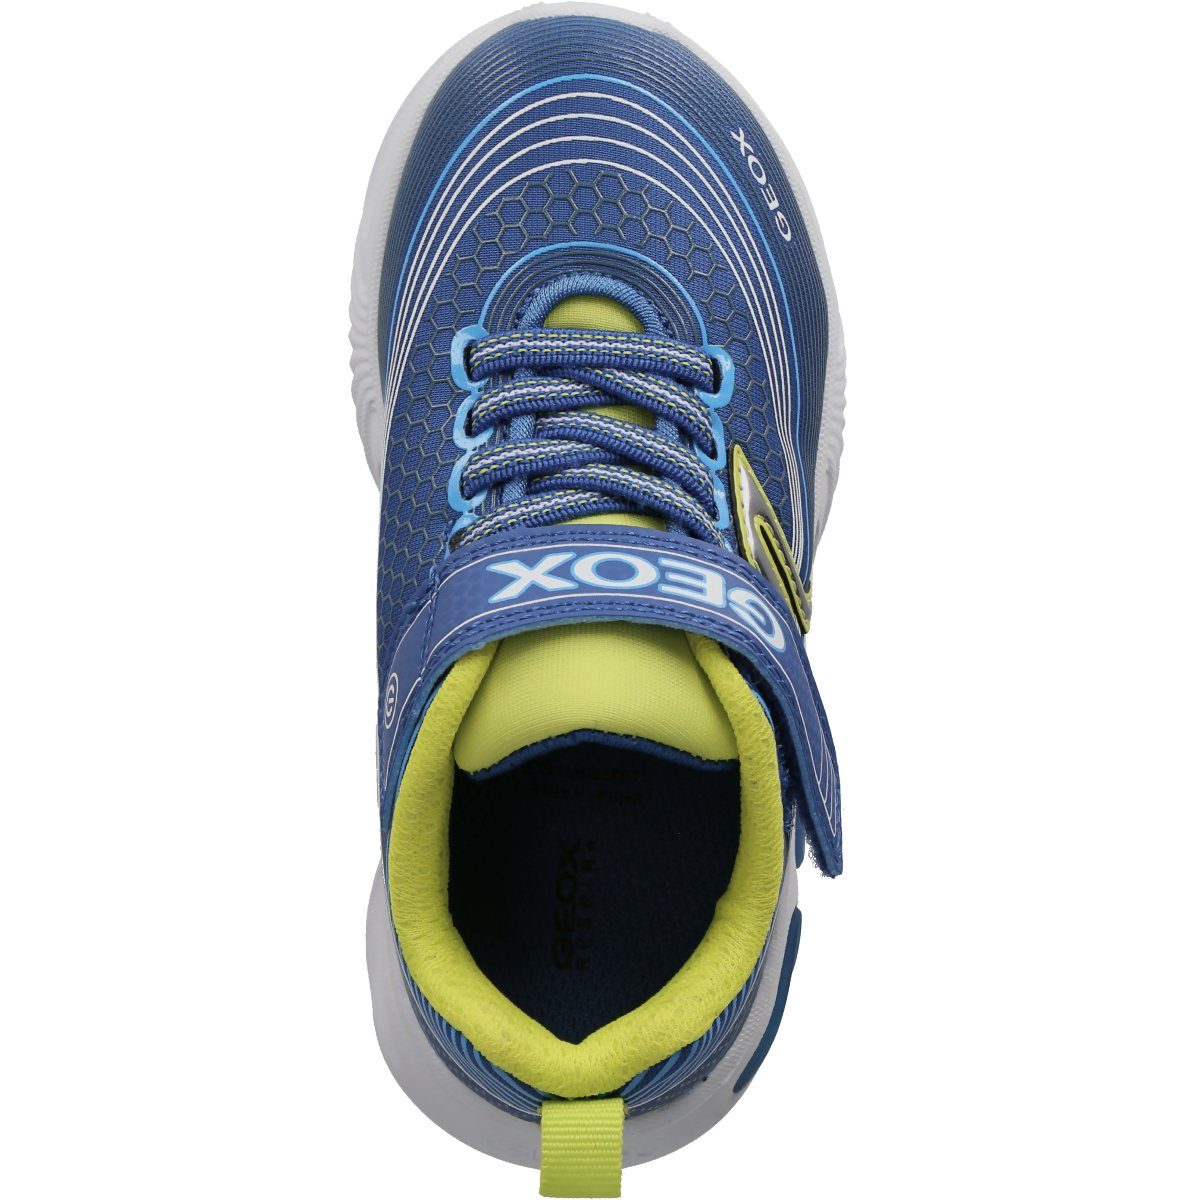 Geox ASSISTER Sneaker ROYAL/LIME